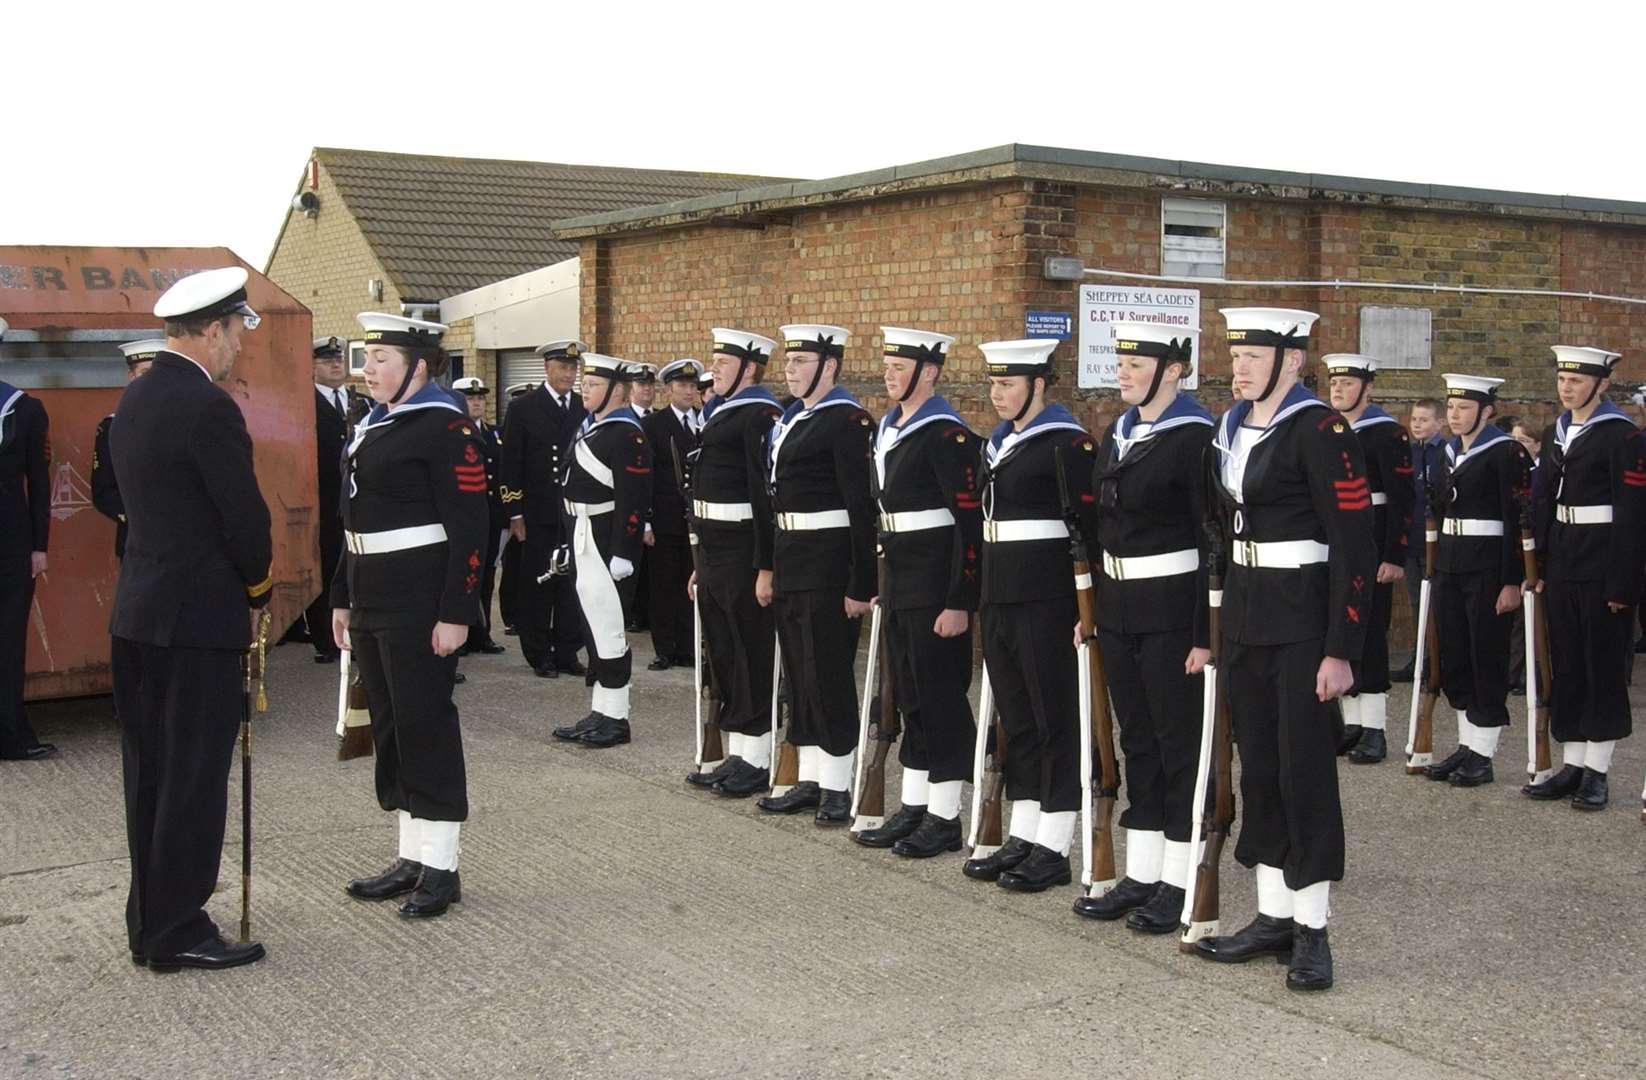 Sea Cadets on parade in front of their old buildings in 2003